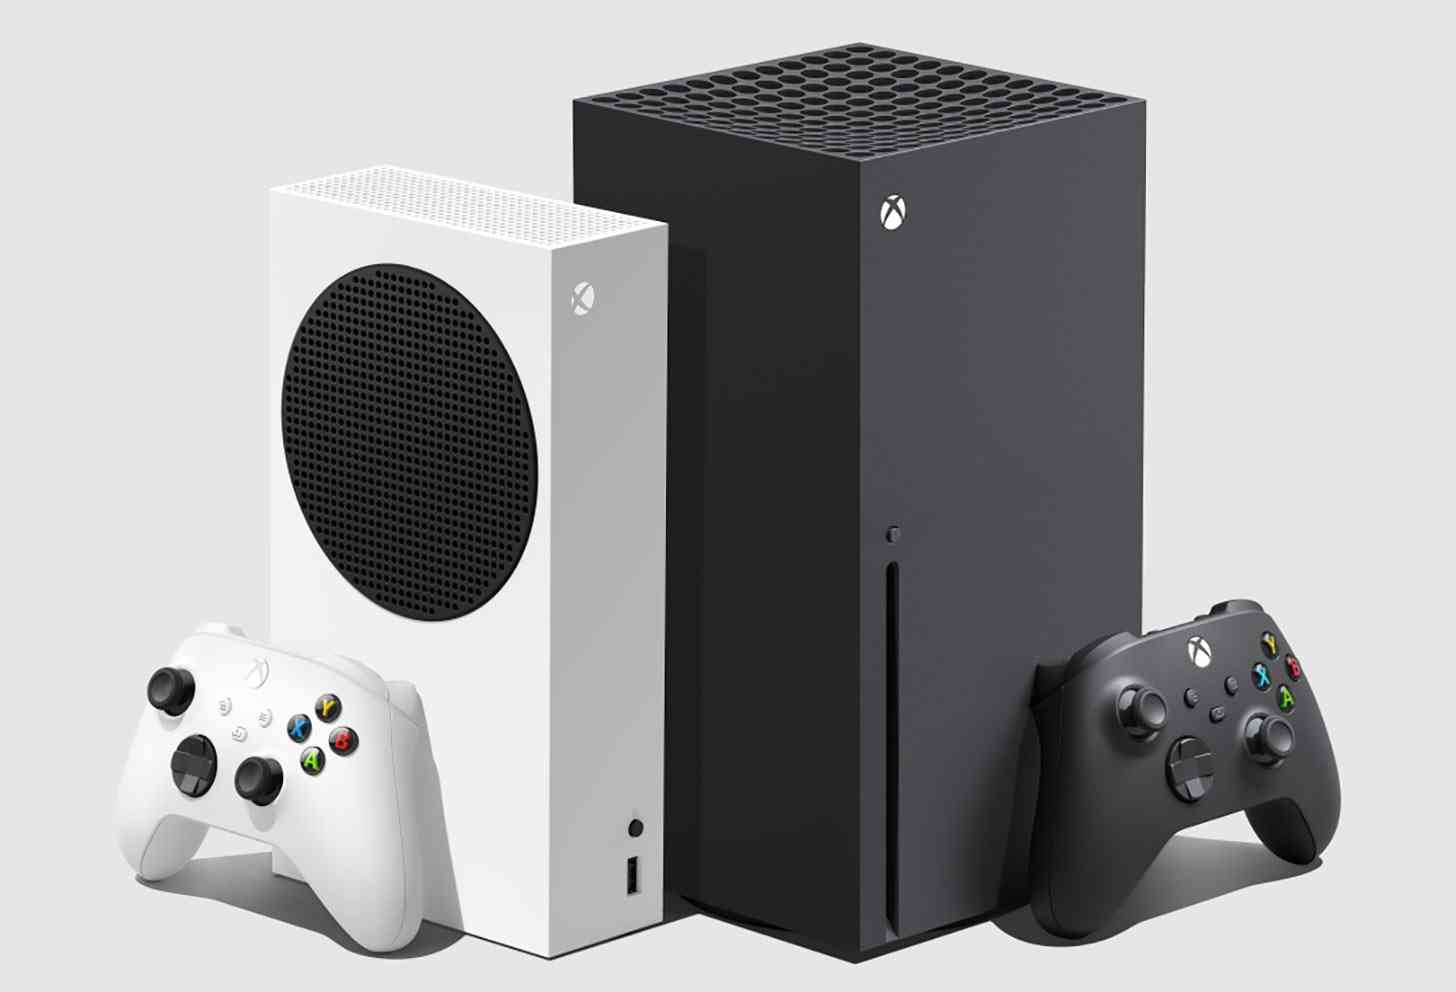 Xbox Series X and Series S consoles